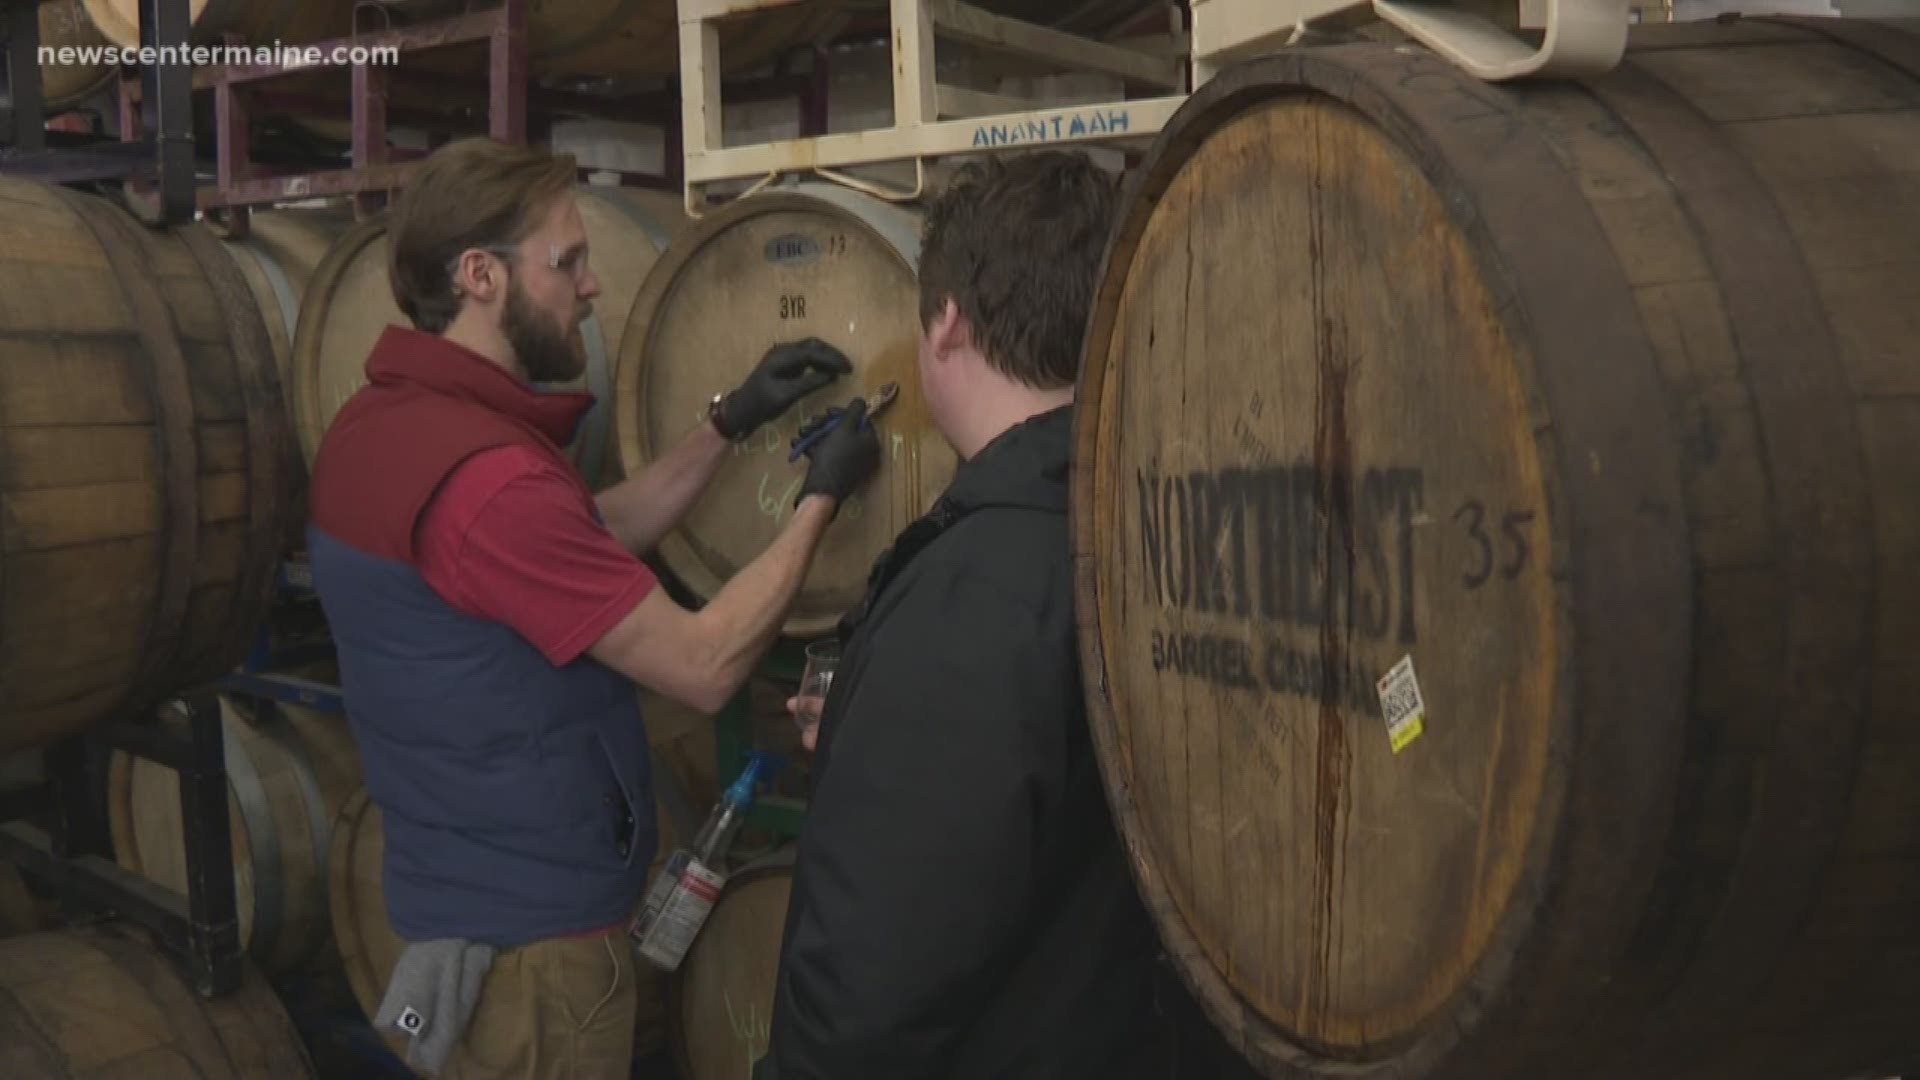 Two Maine breweries rank in the top-50 fastest growing in the country.